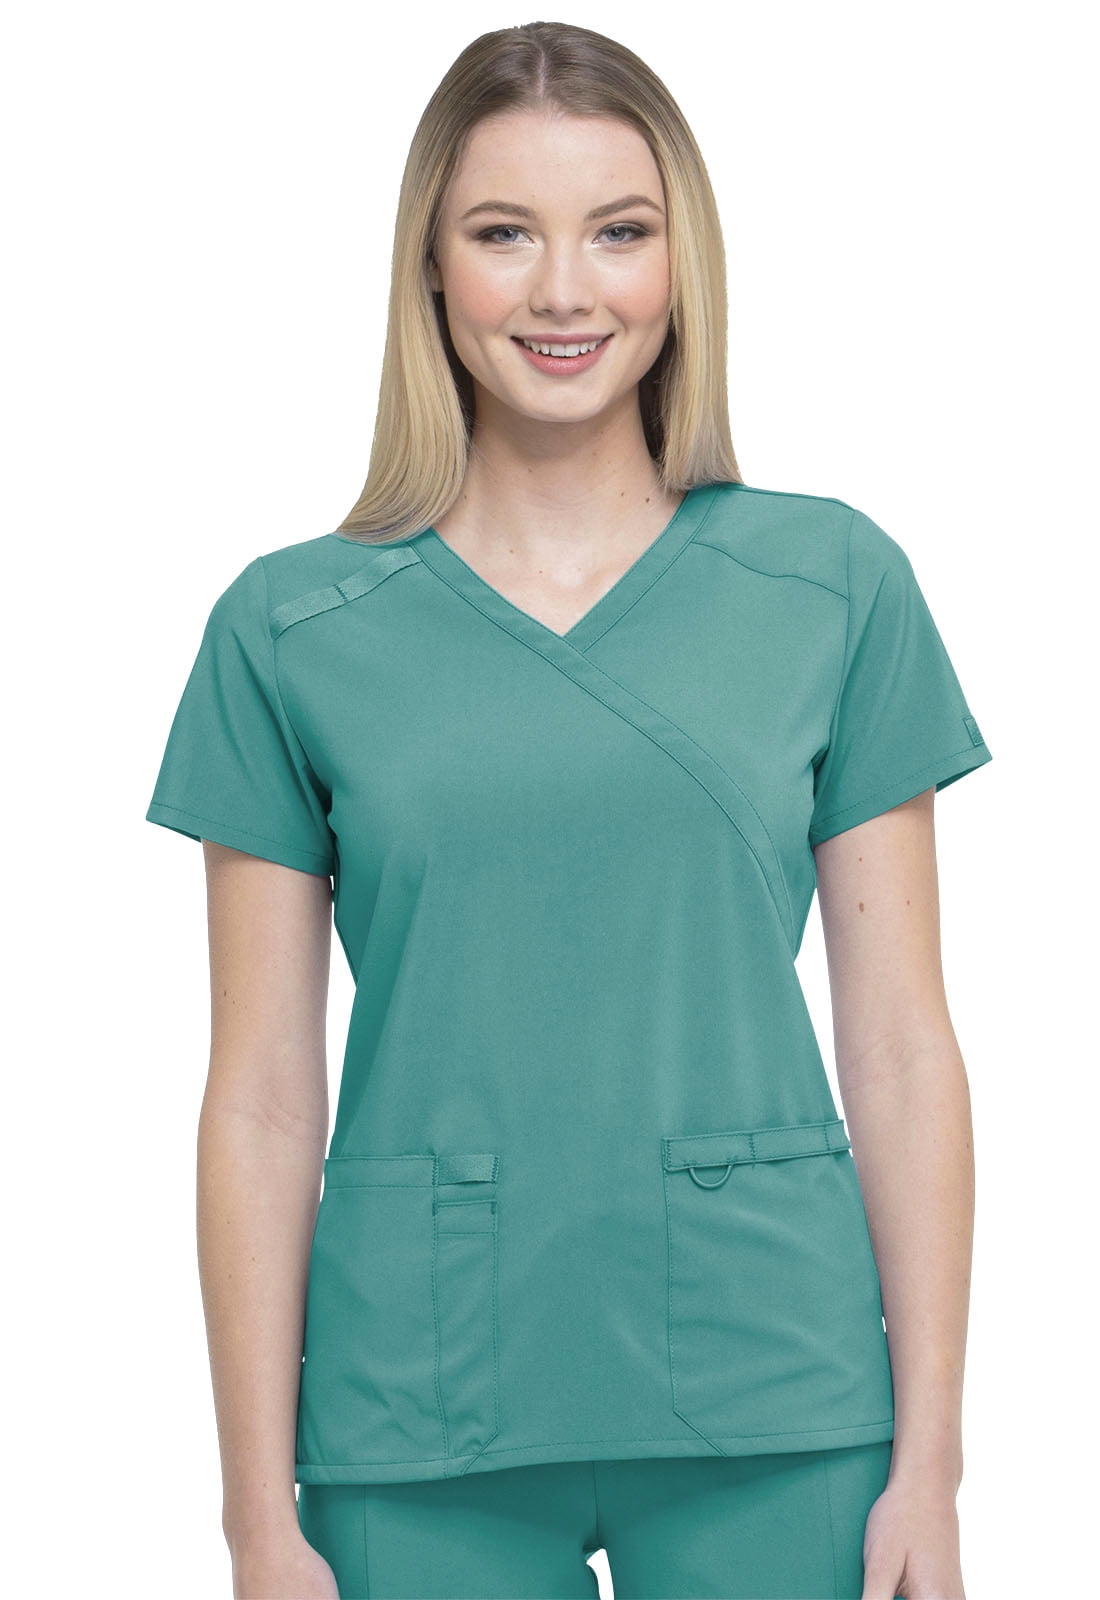 Details about   Turquoise Blue Dickies Scrubs EDS Essentials Mock Wrap Top DK625 TRQ 